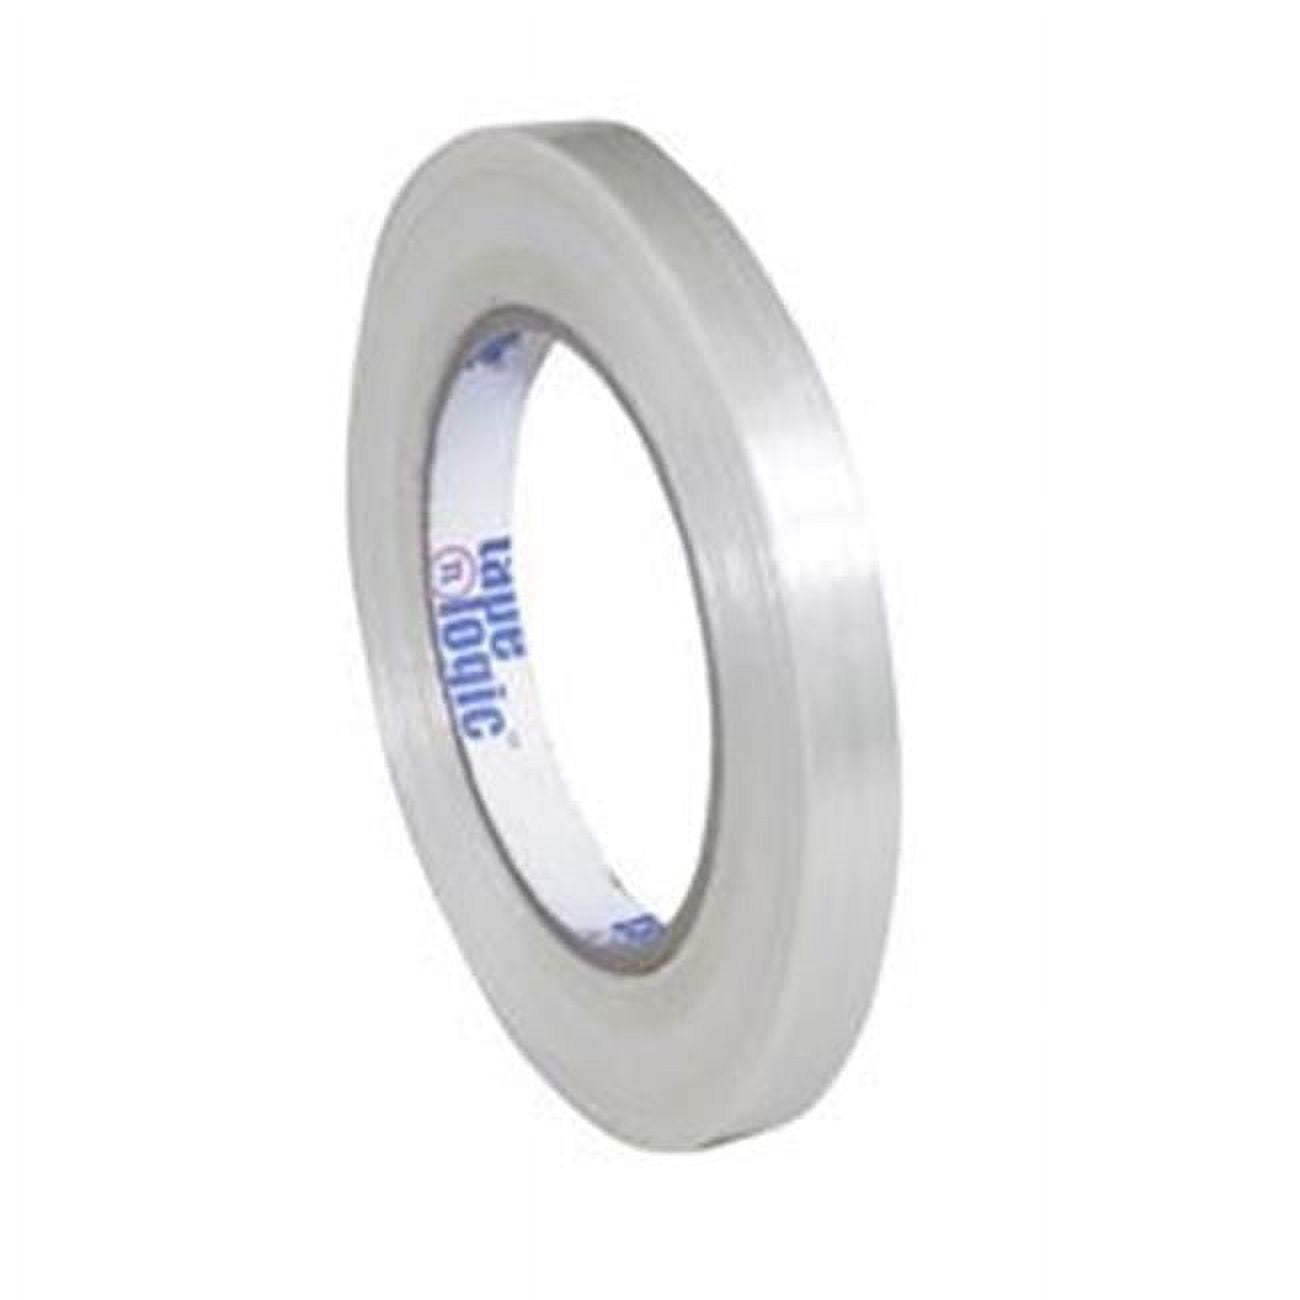 Tape Logic T9131500 0.50 In. X 60 Yards 1500 Strapping Tape, Clear - Case Of 72